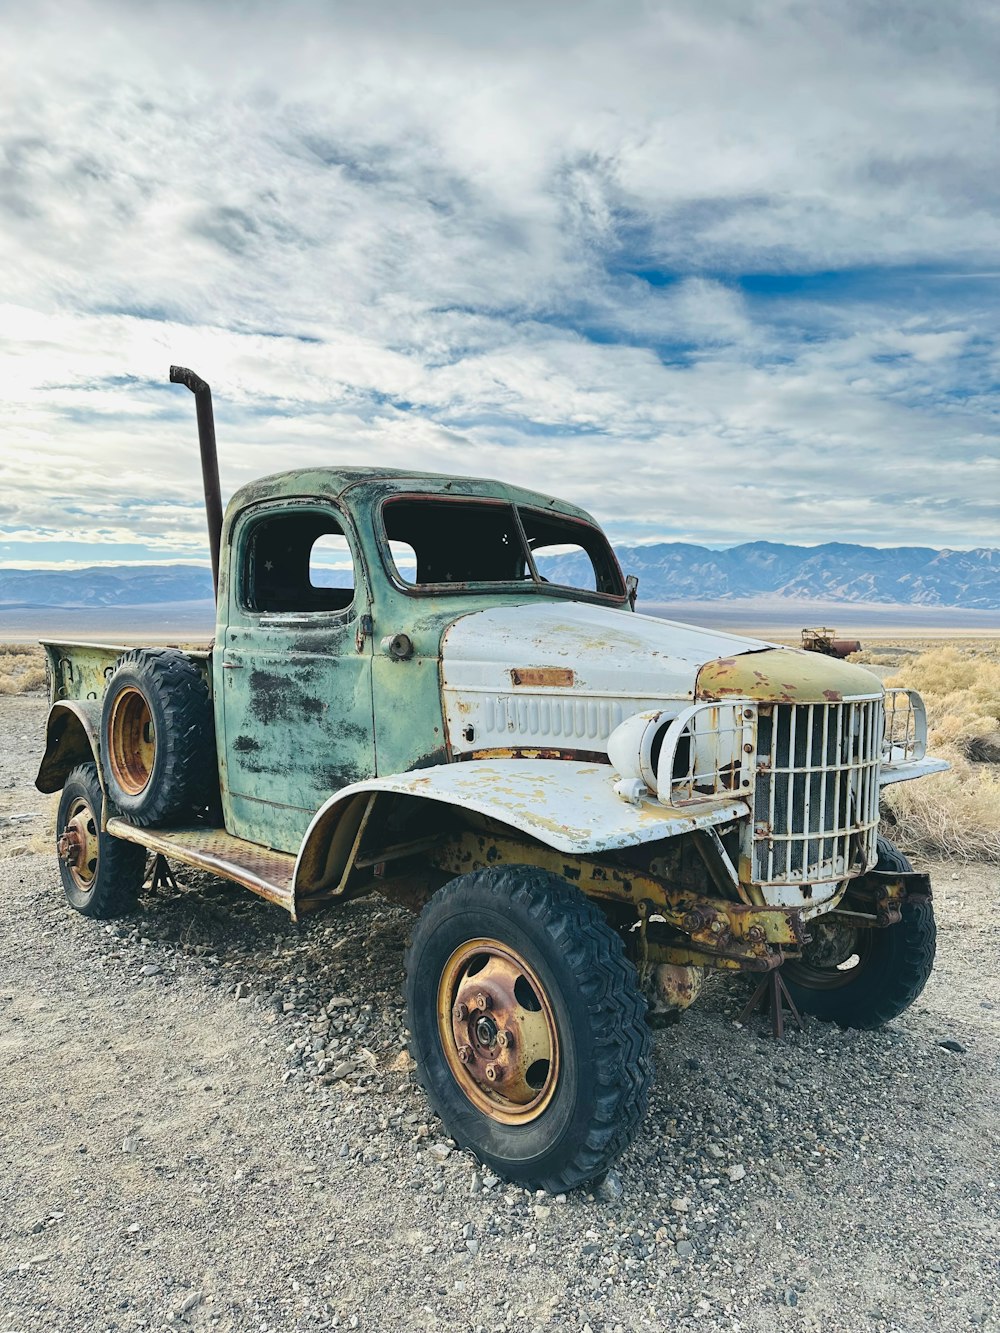 an old truck sitting in the middle of a desert